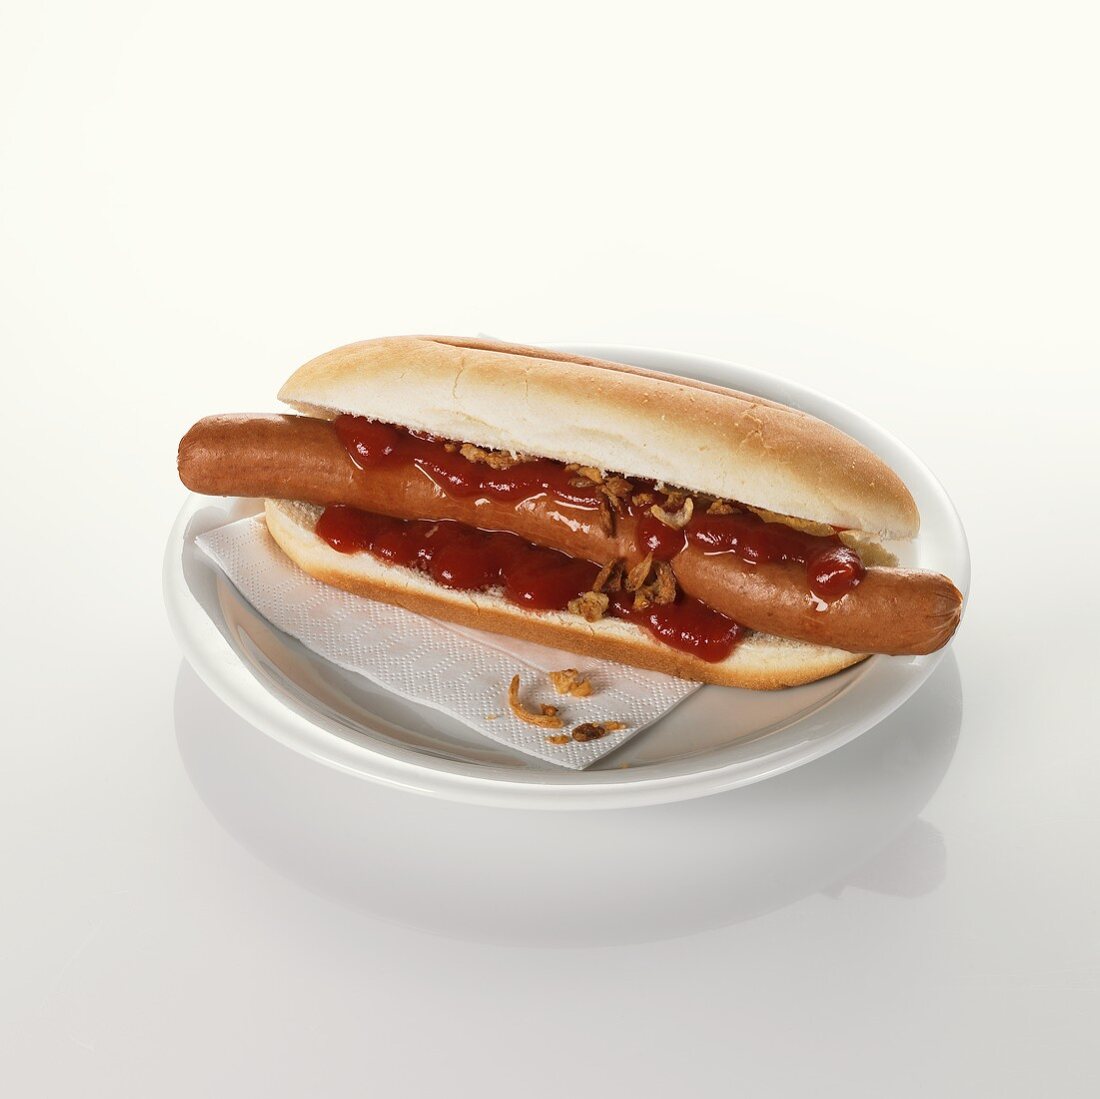 Hot dog with ketchup on plate